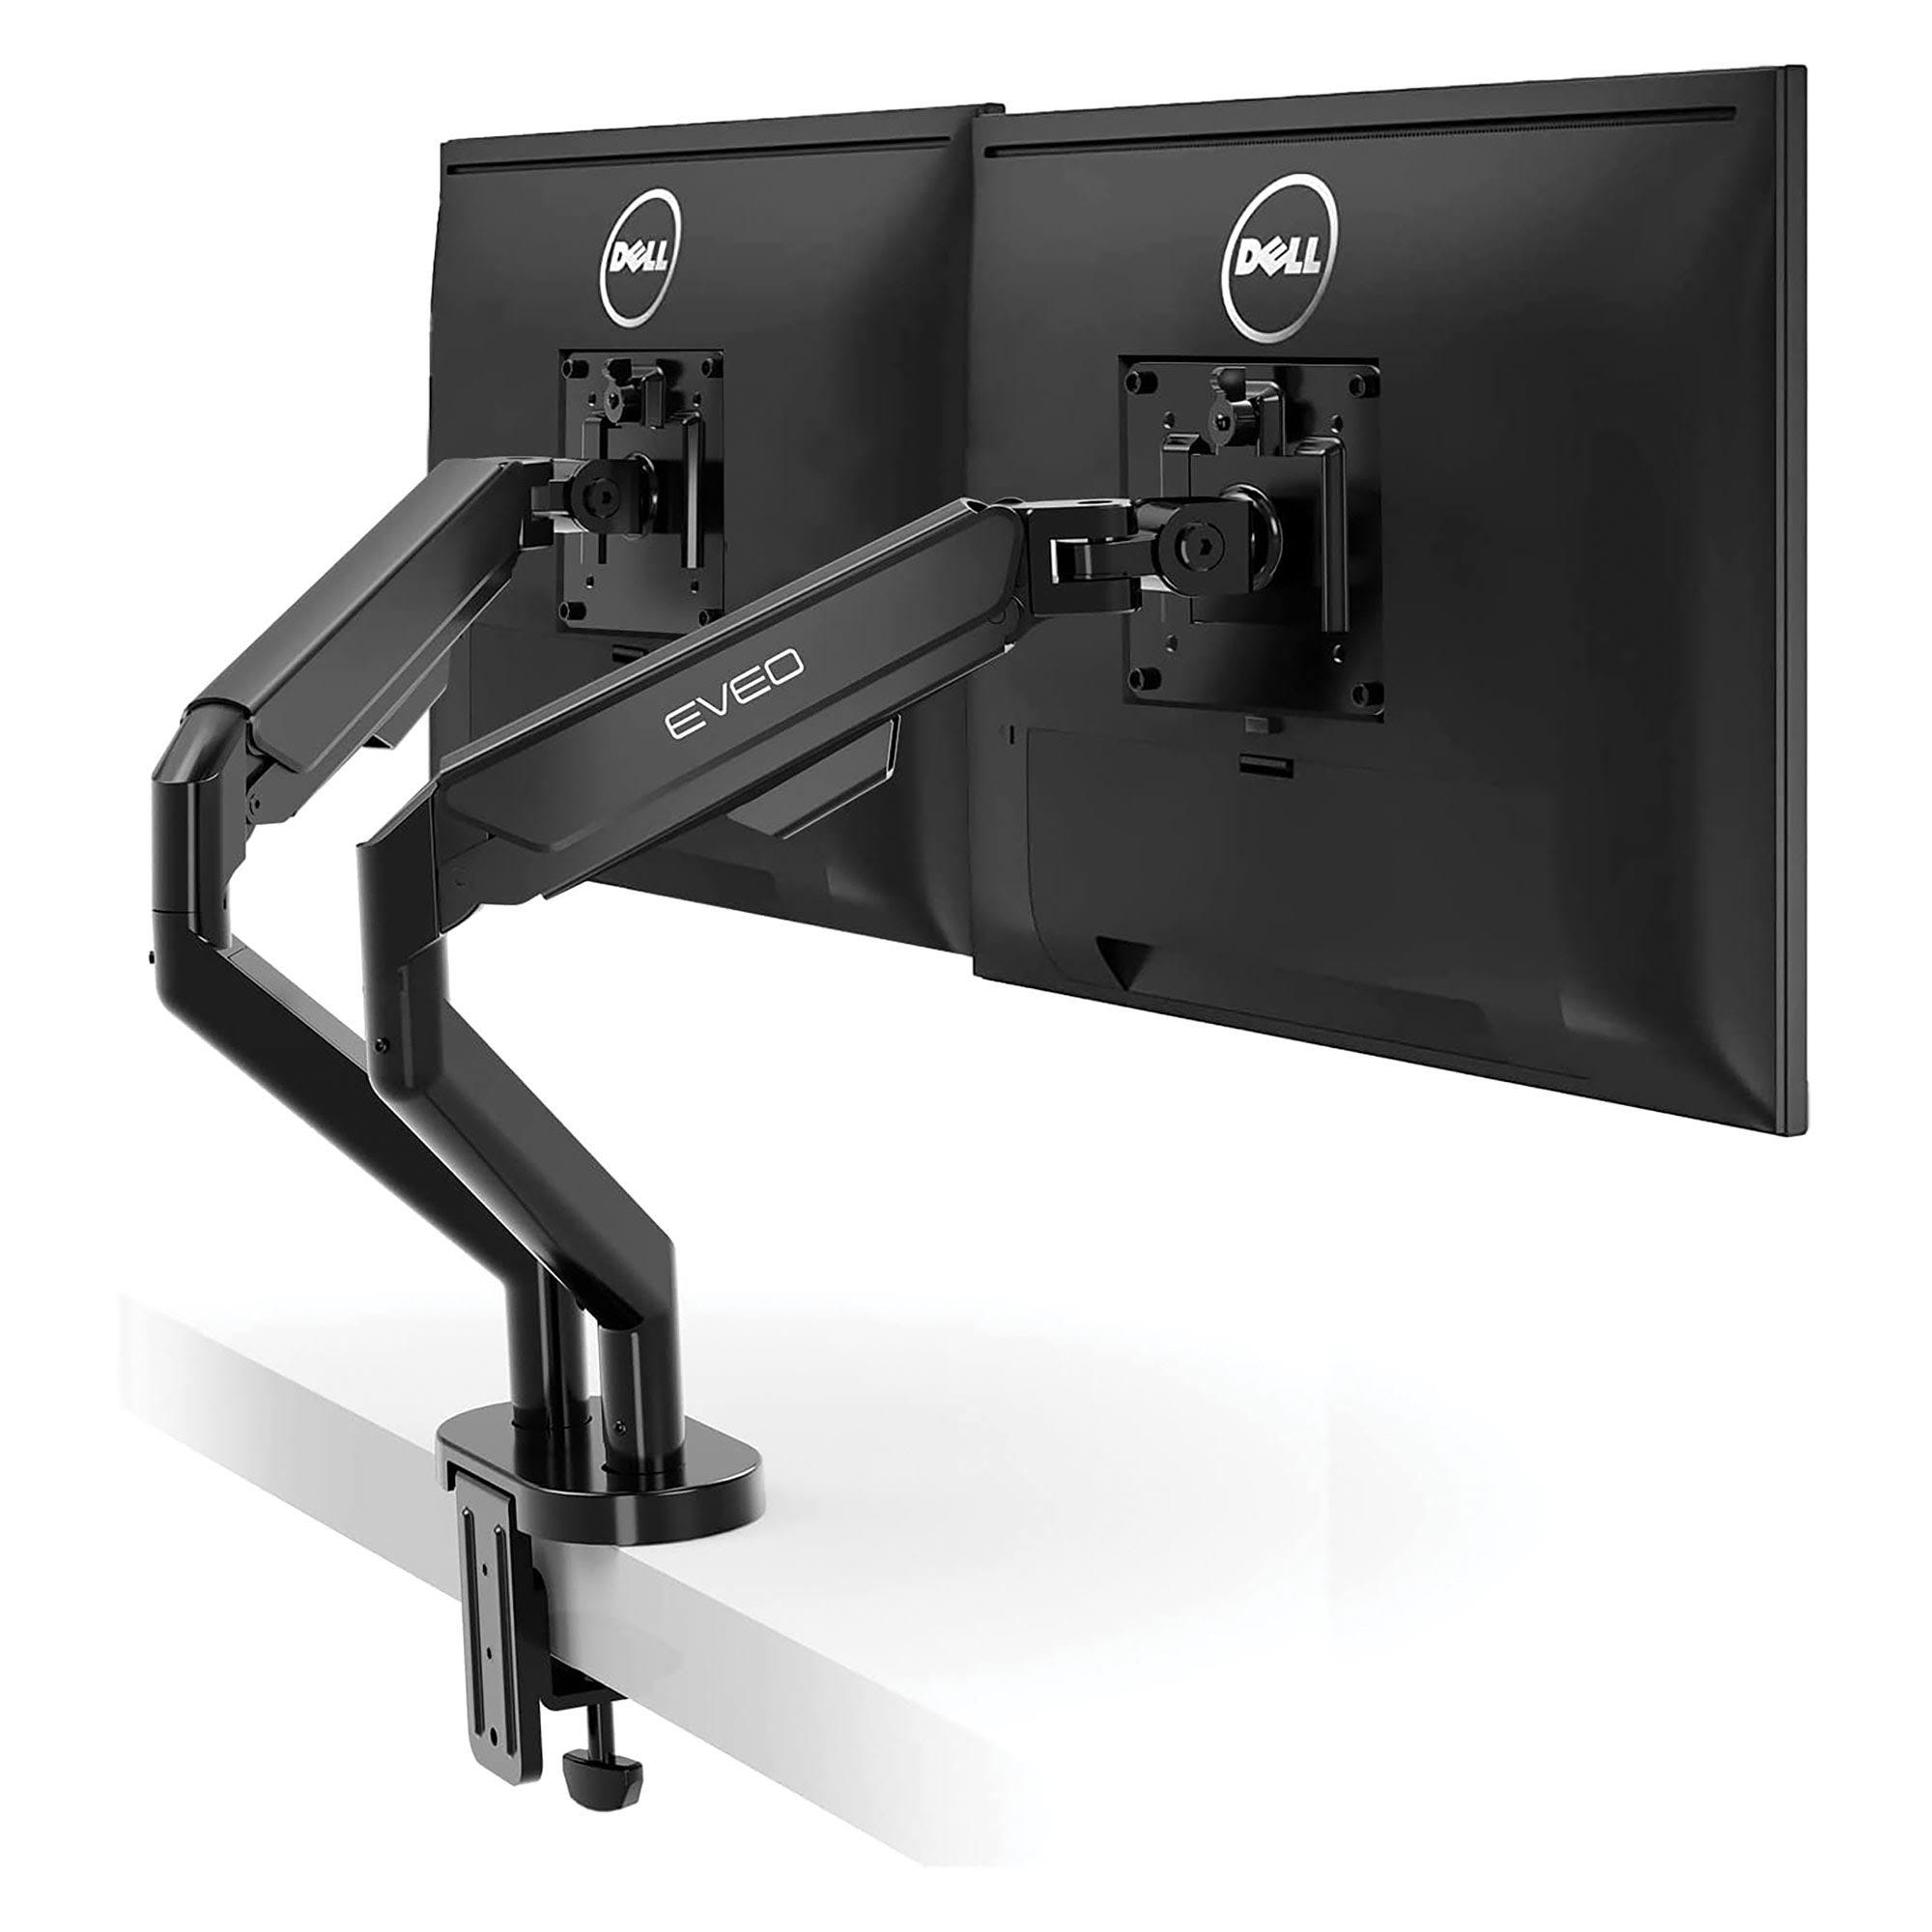 Ergonomic Dual Monitor Stand with Rotation Capabilities | Image